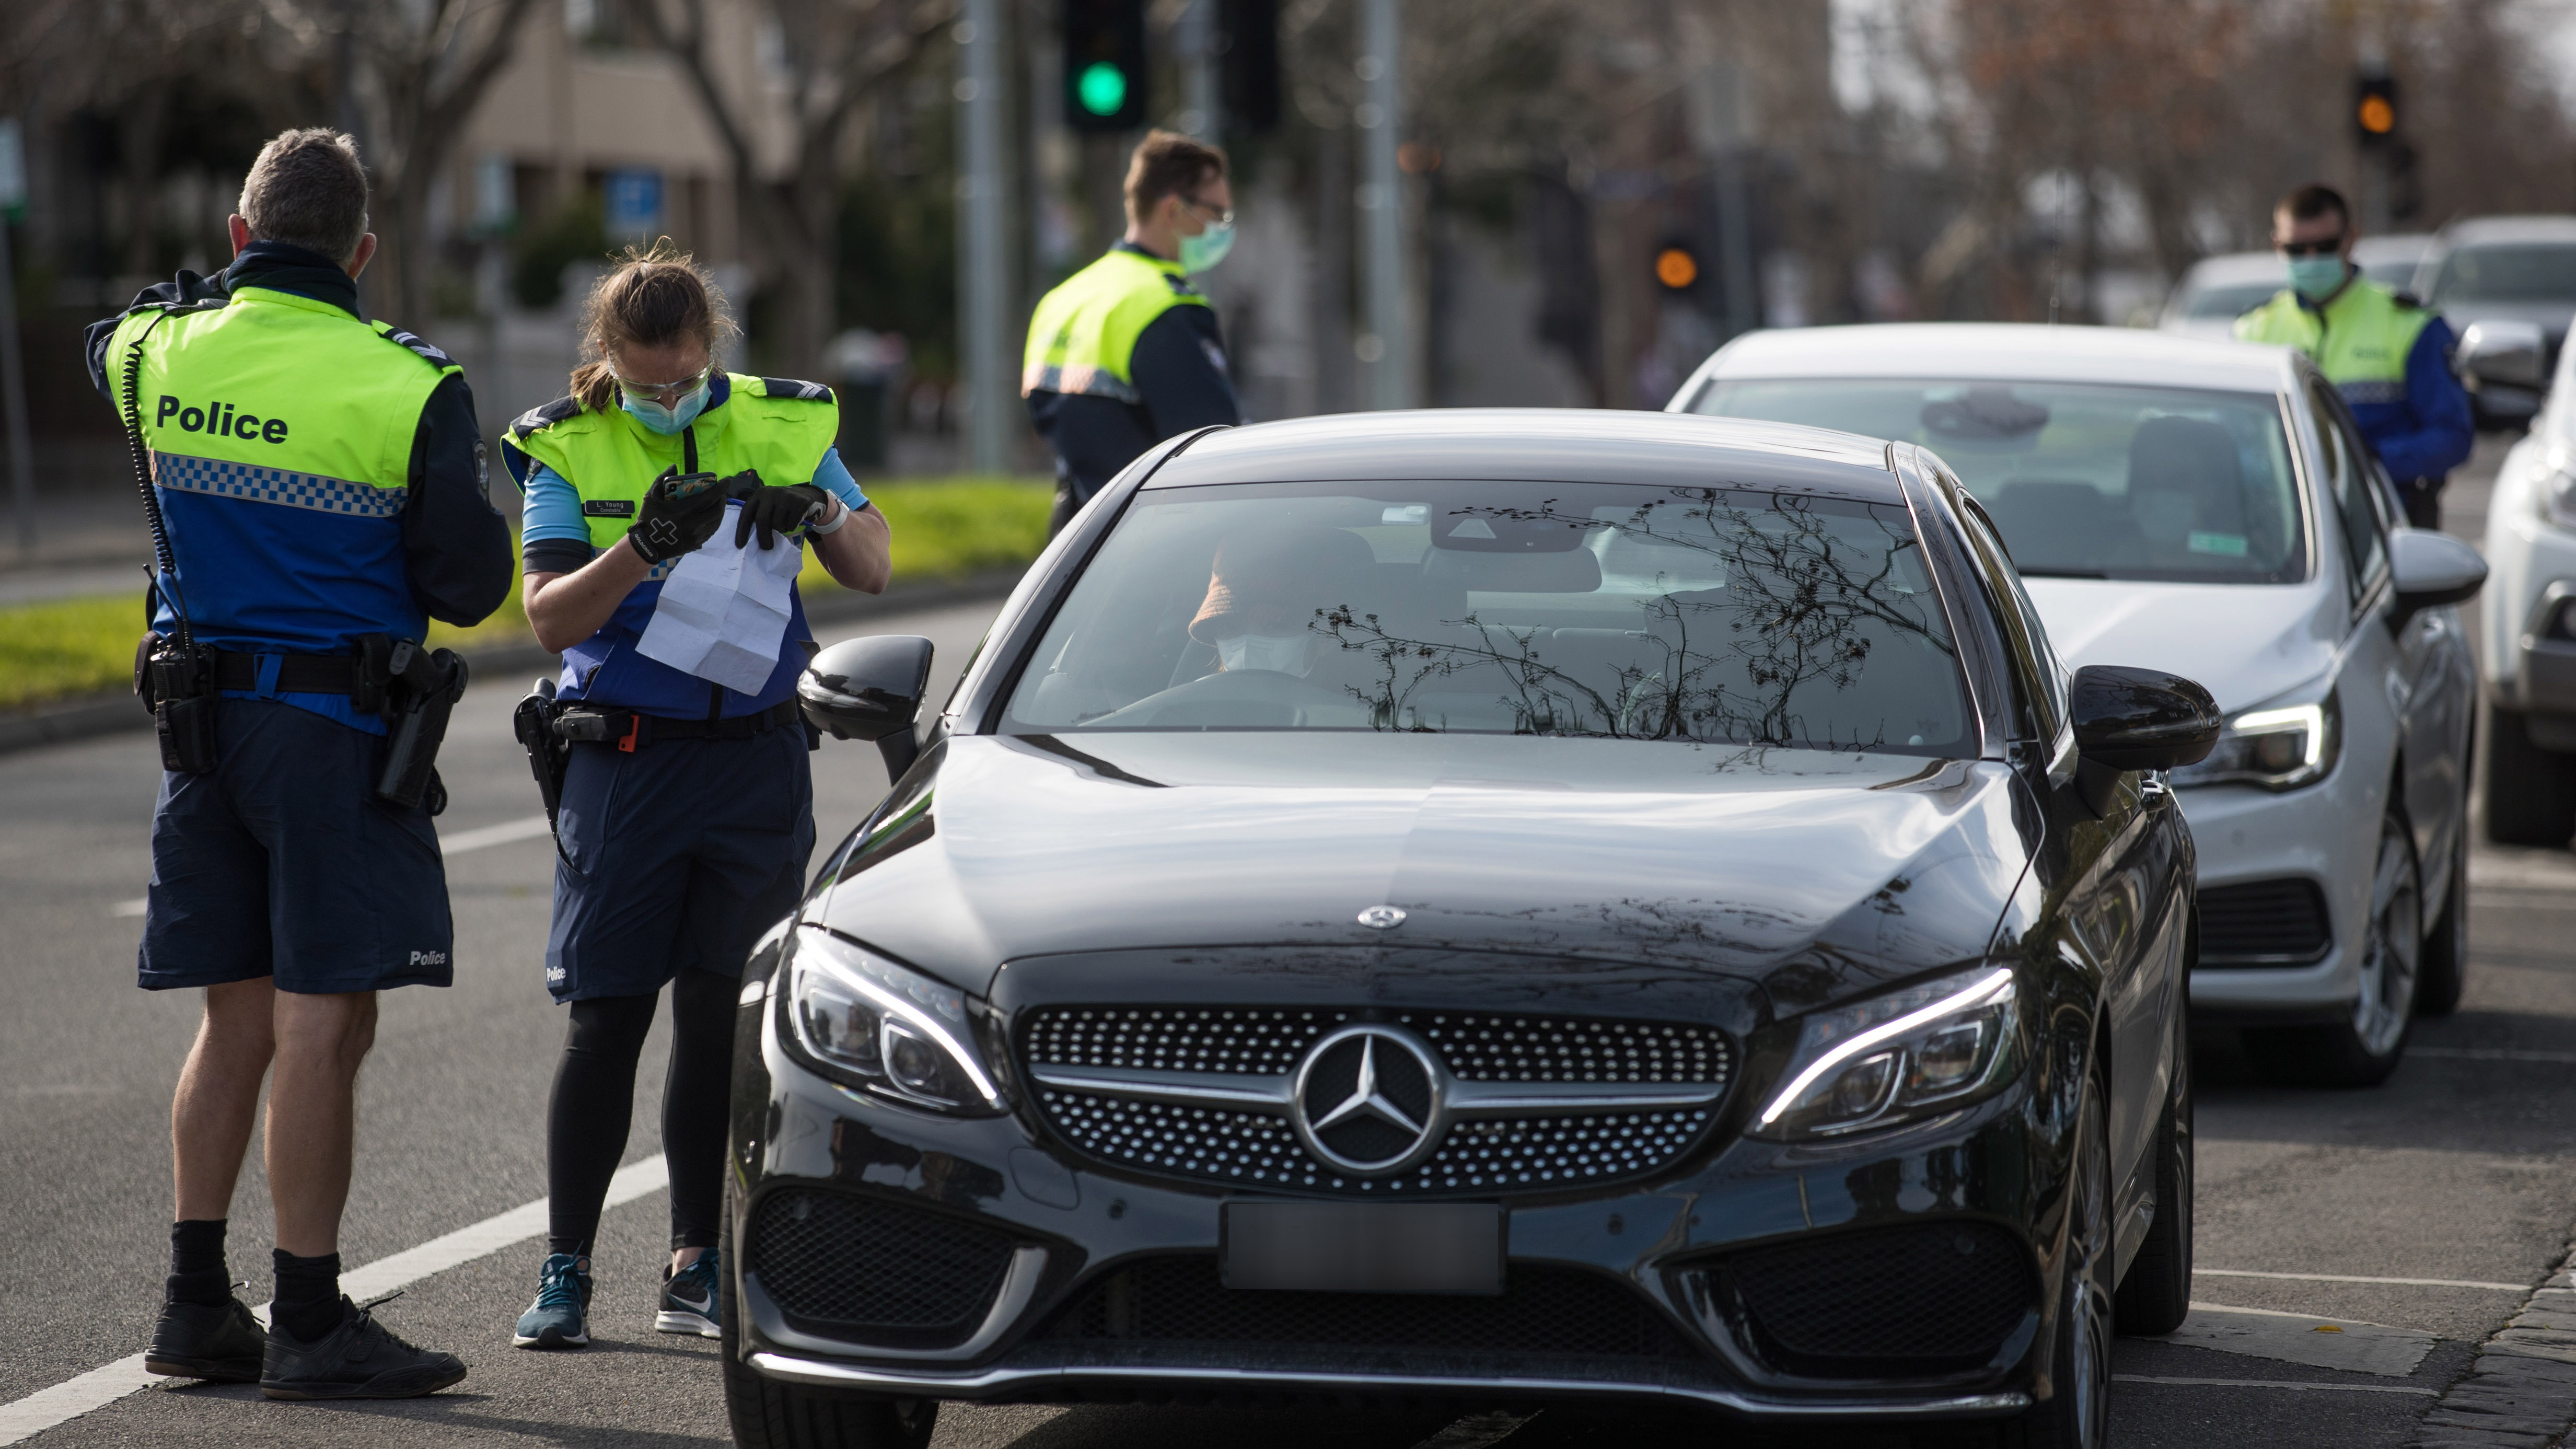 Police officers pulling over cars on Rathdowne street in Carlton, Melbourne.